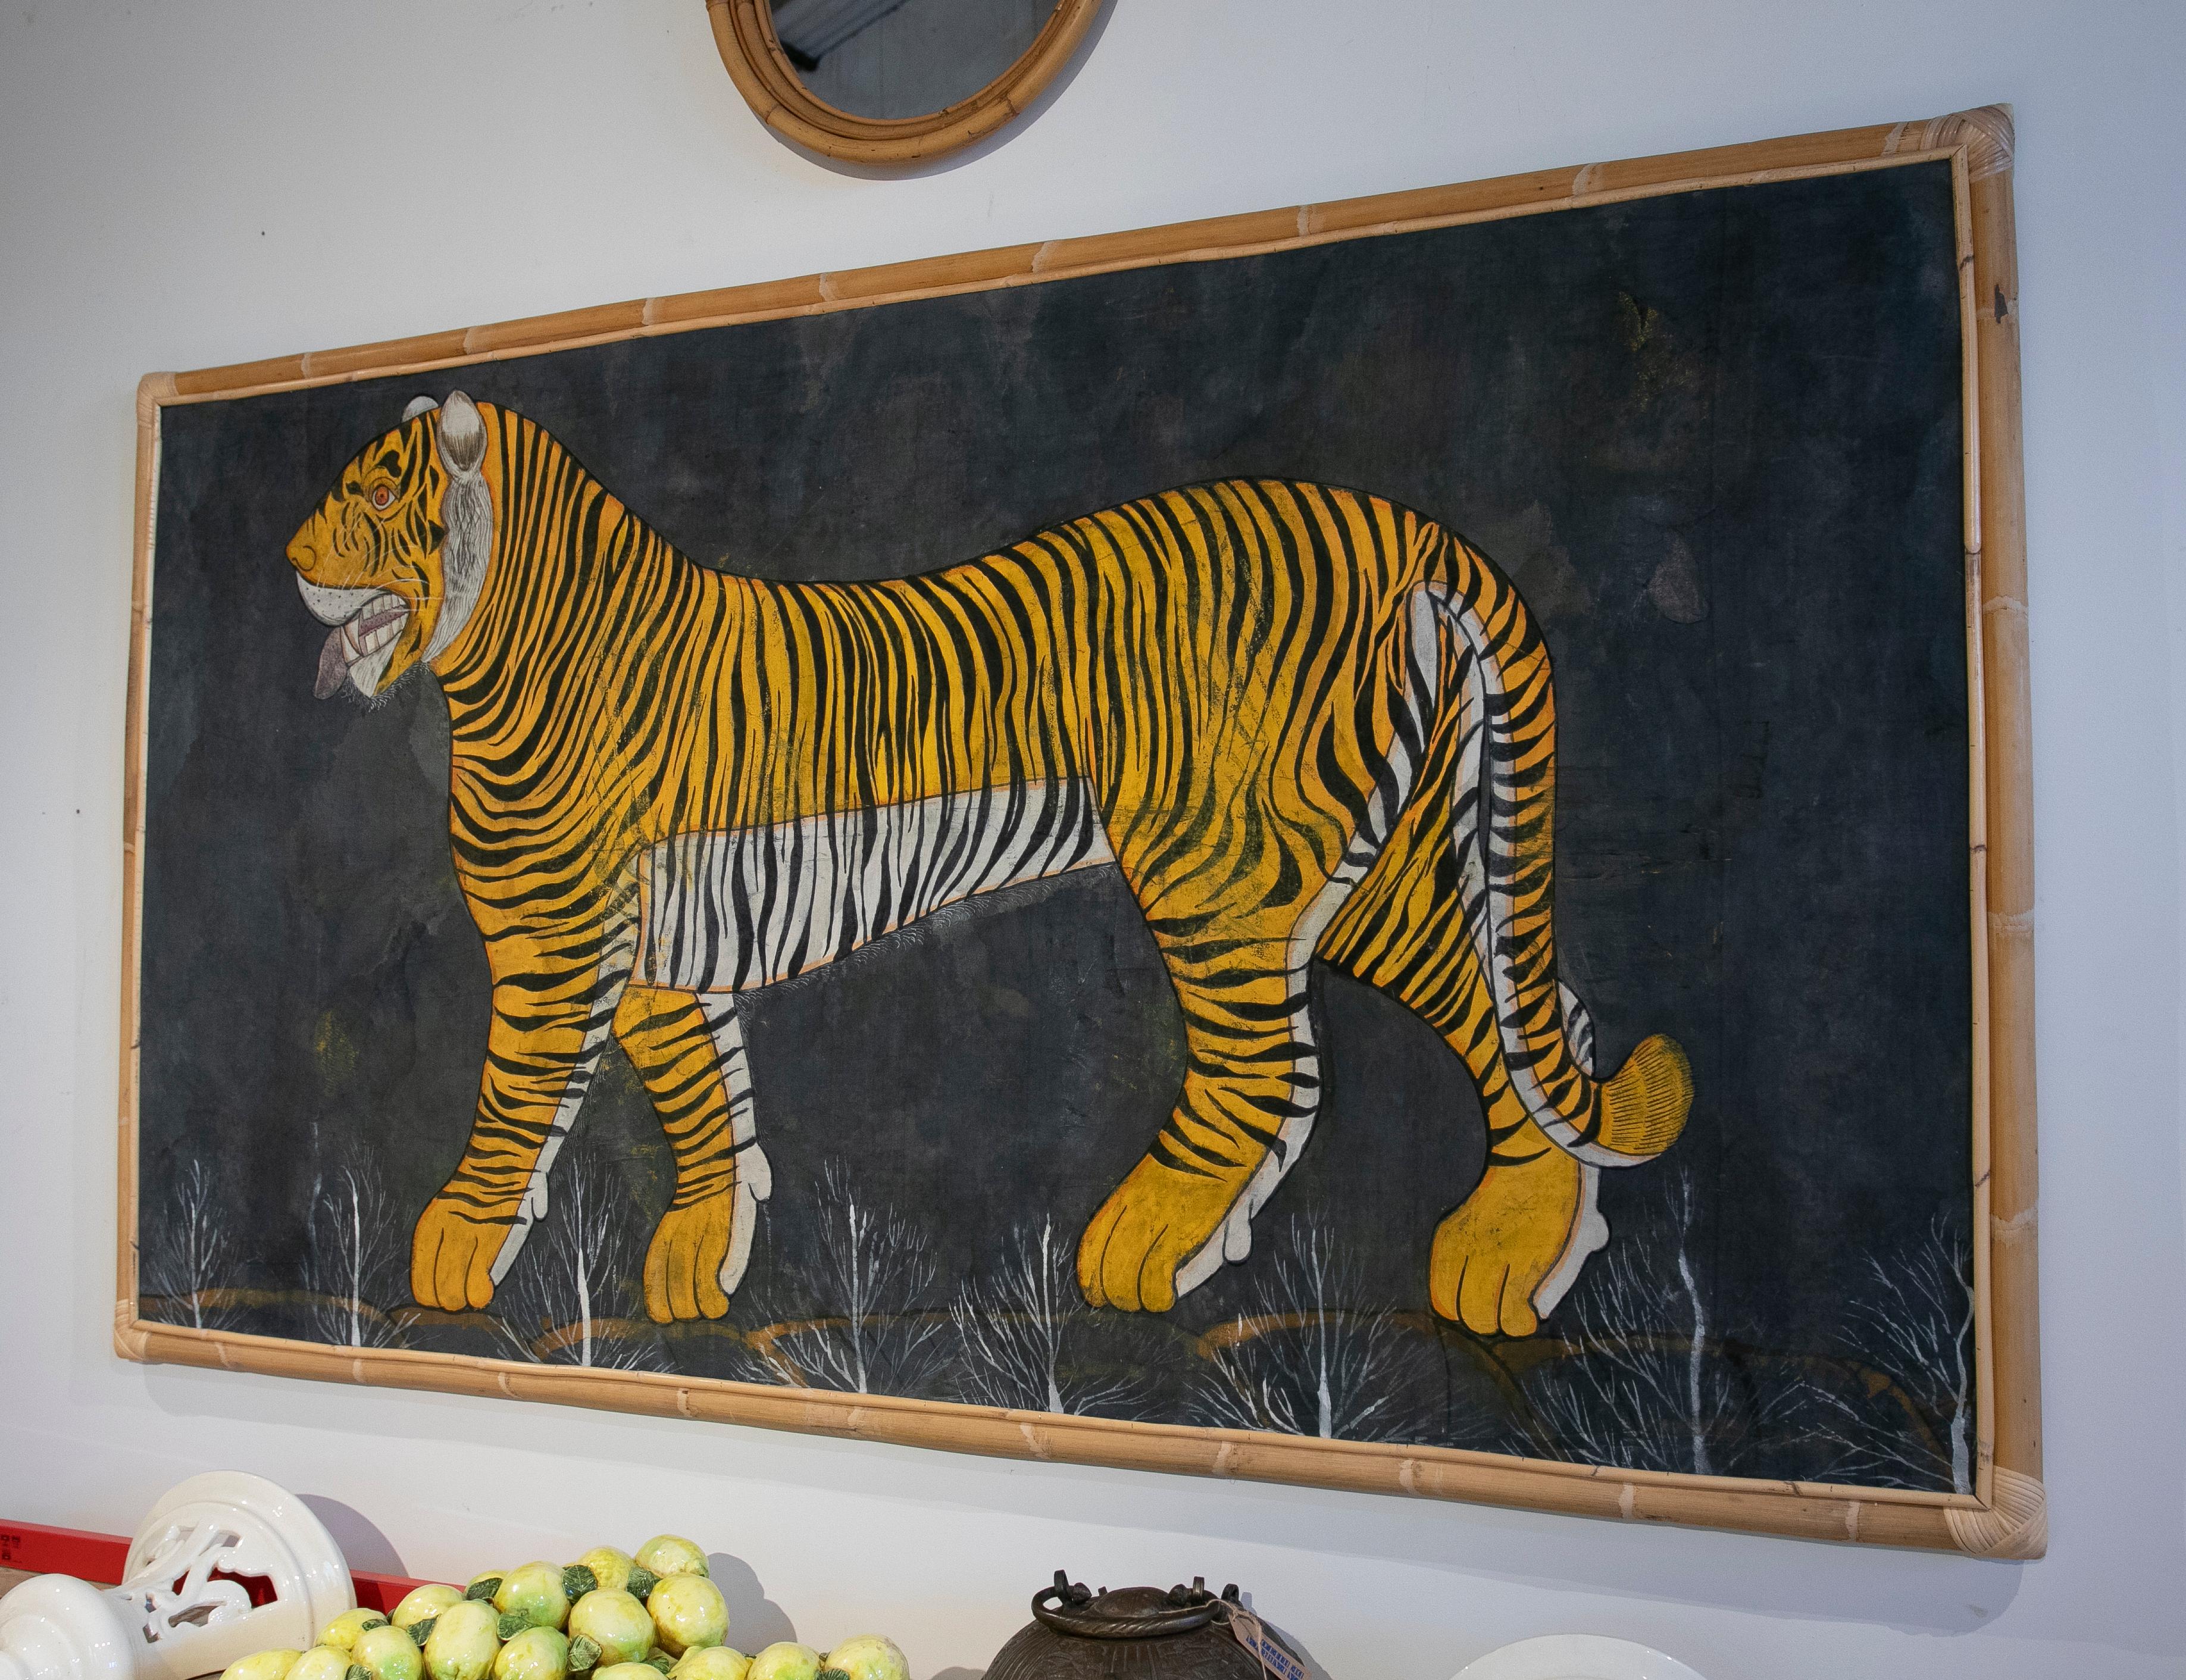 1970s Bengal tiger painting in Jaime Parlade style.